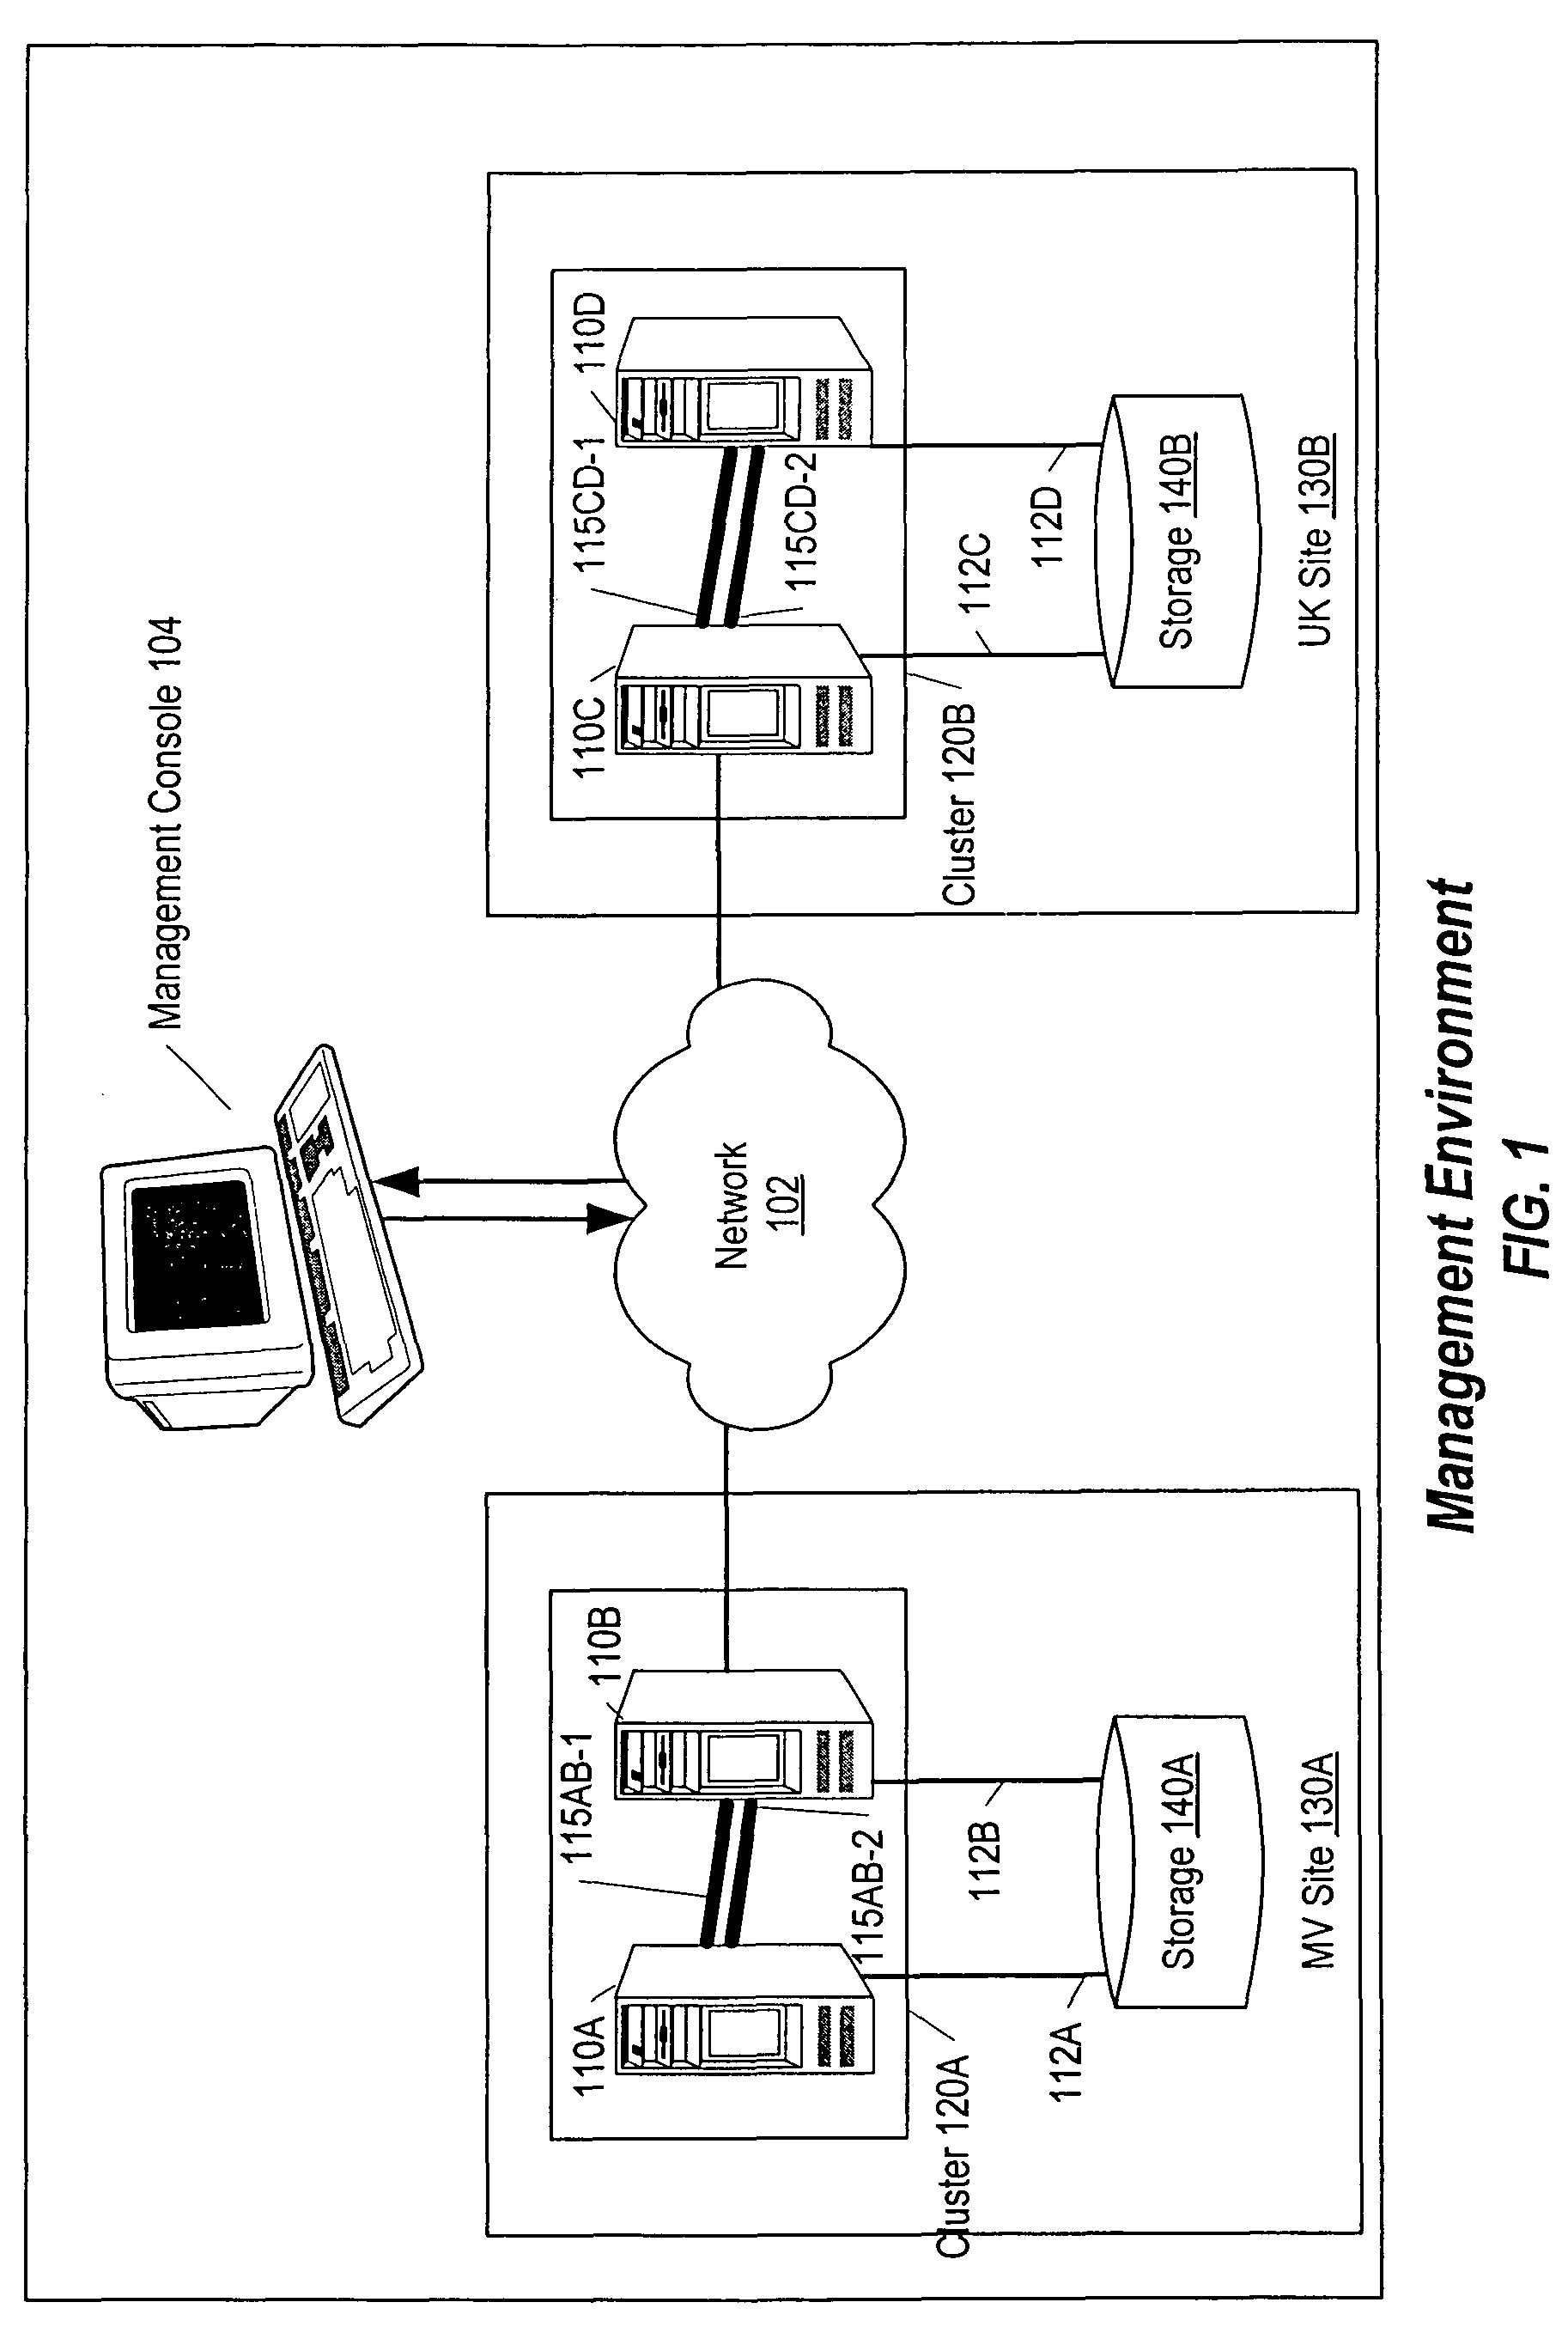 Business continuation policy for server consolidation environment